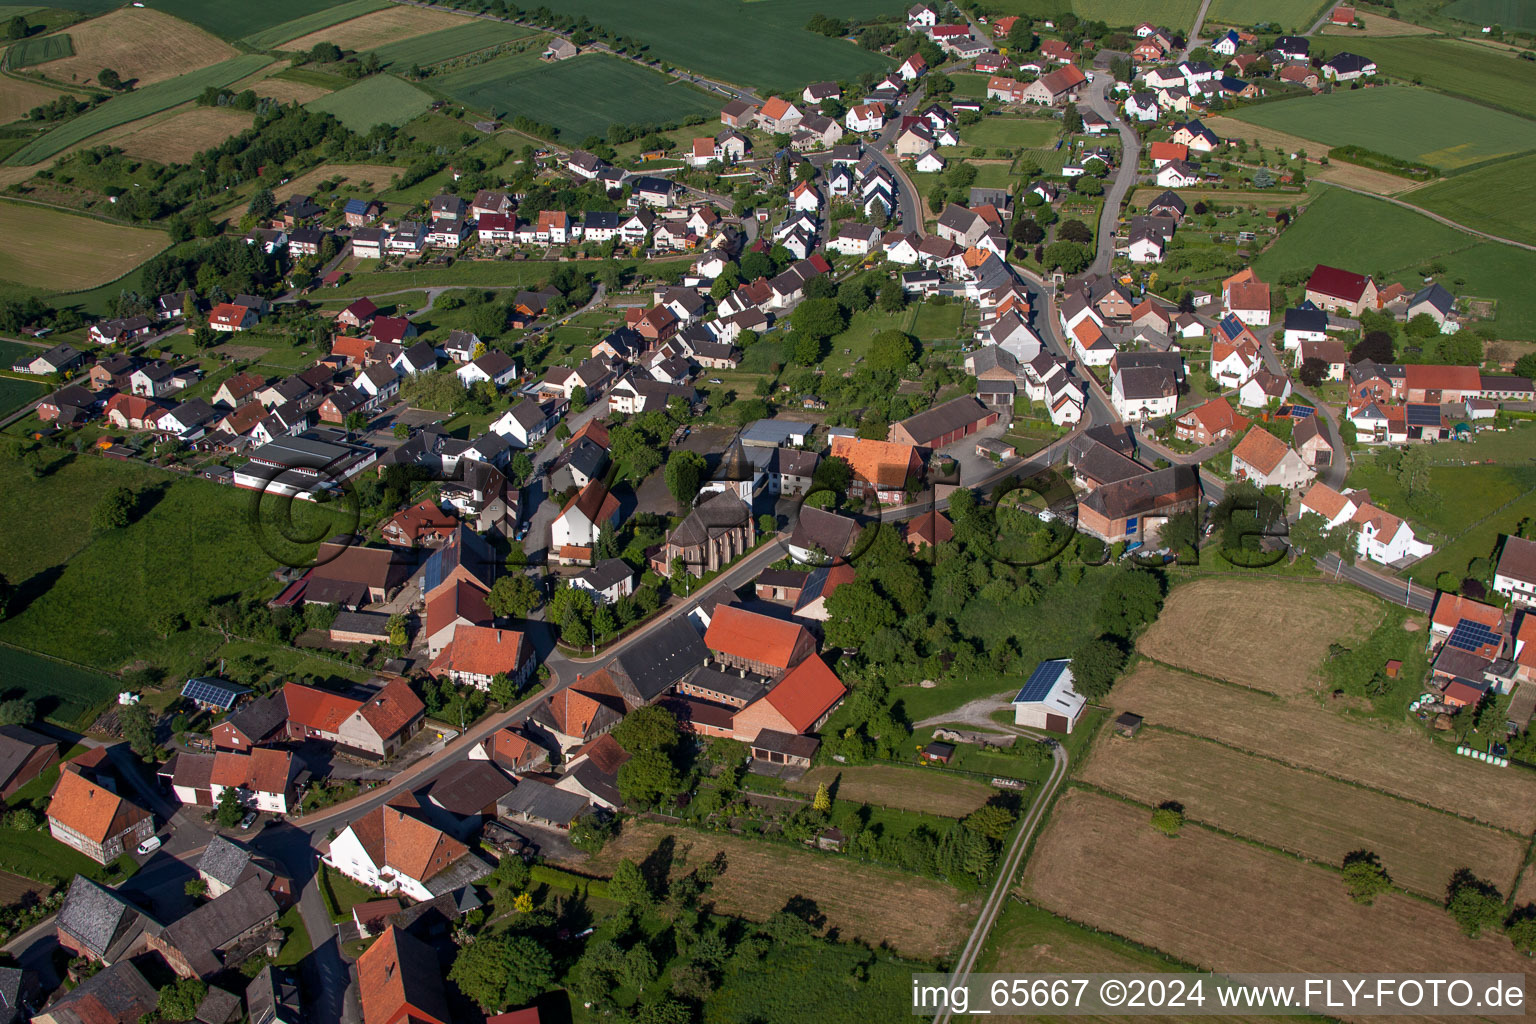 Village - view on the edge of agricultural fields and farmland in the district Haarbrueck in Beverungen in the state North Rhine-Westphalia, Germany